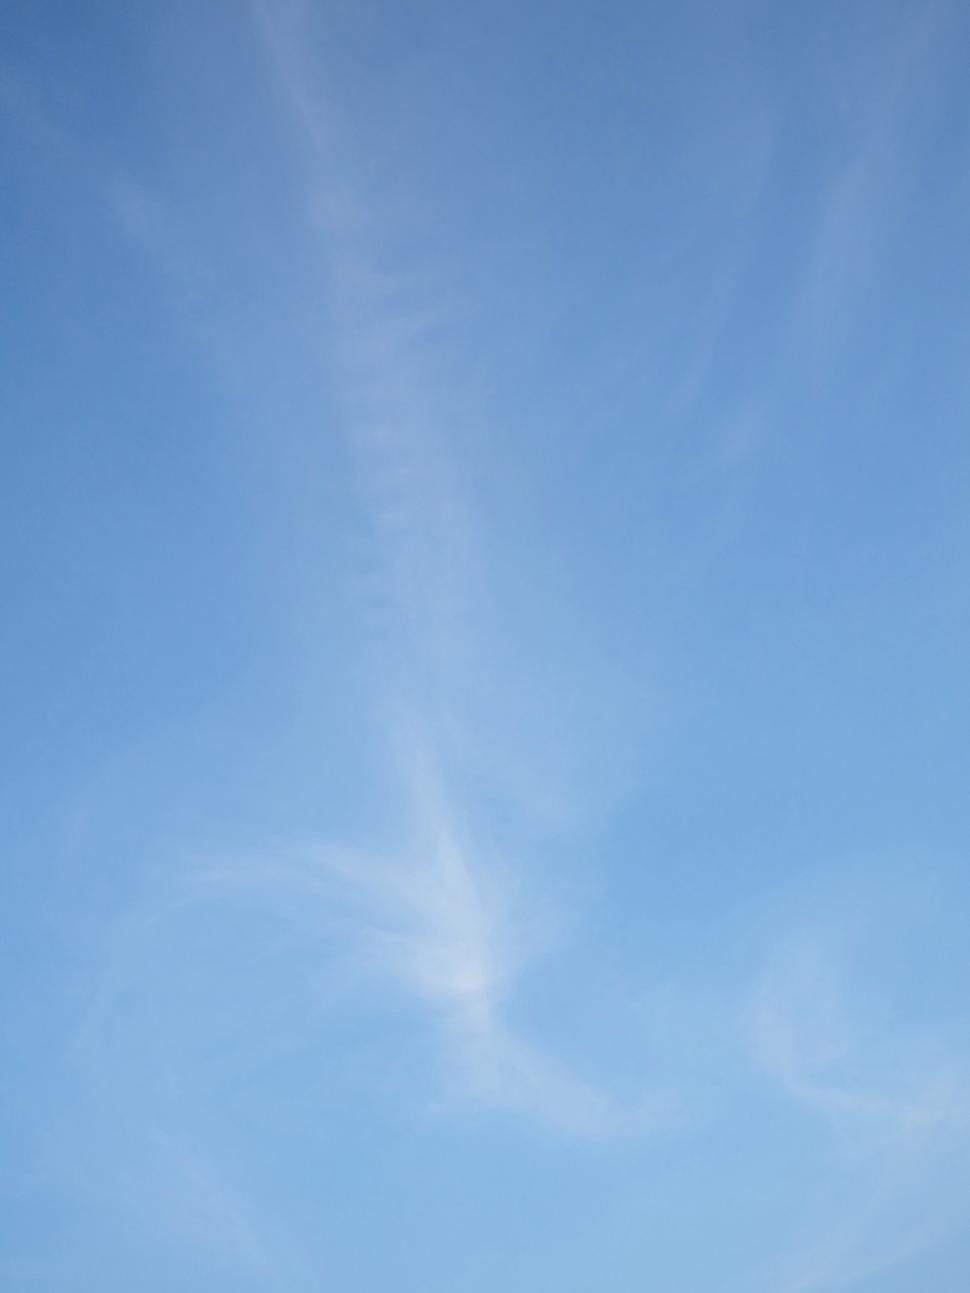 Free Image of Clouds in the Blue Sky  